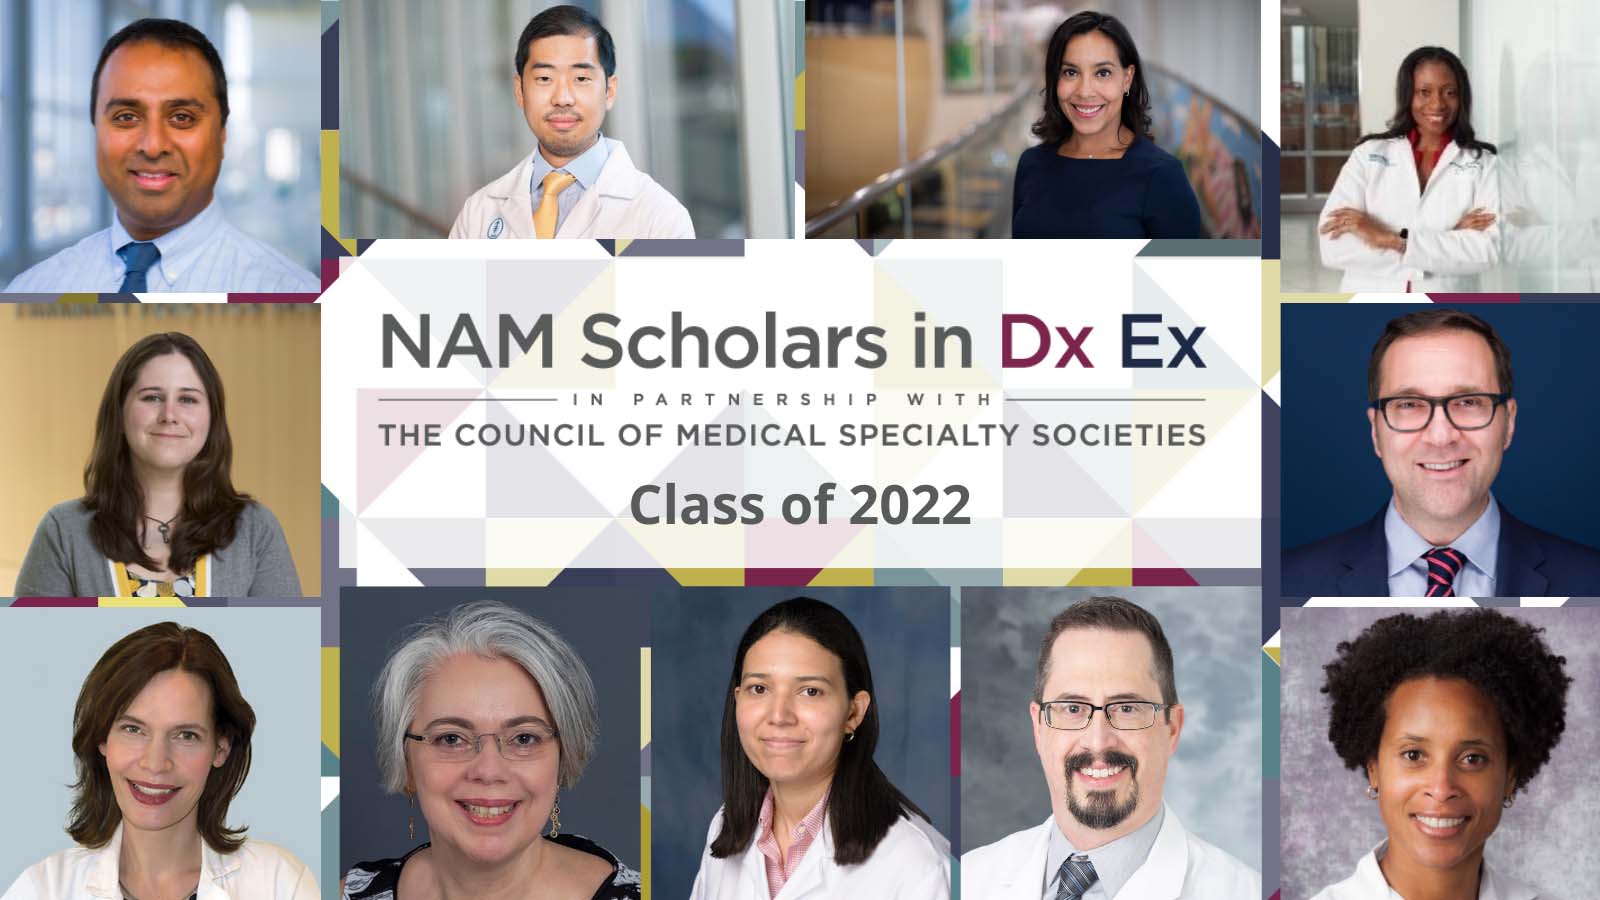 National Academy of Medicine Names 11 Scholars in Diagnostic Excellence